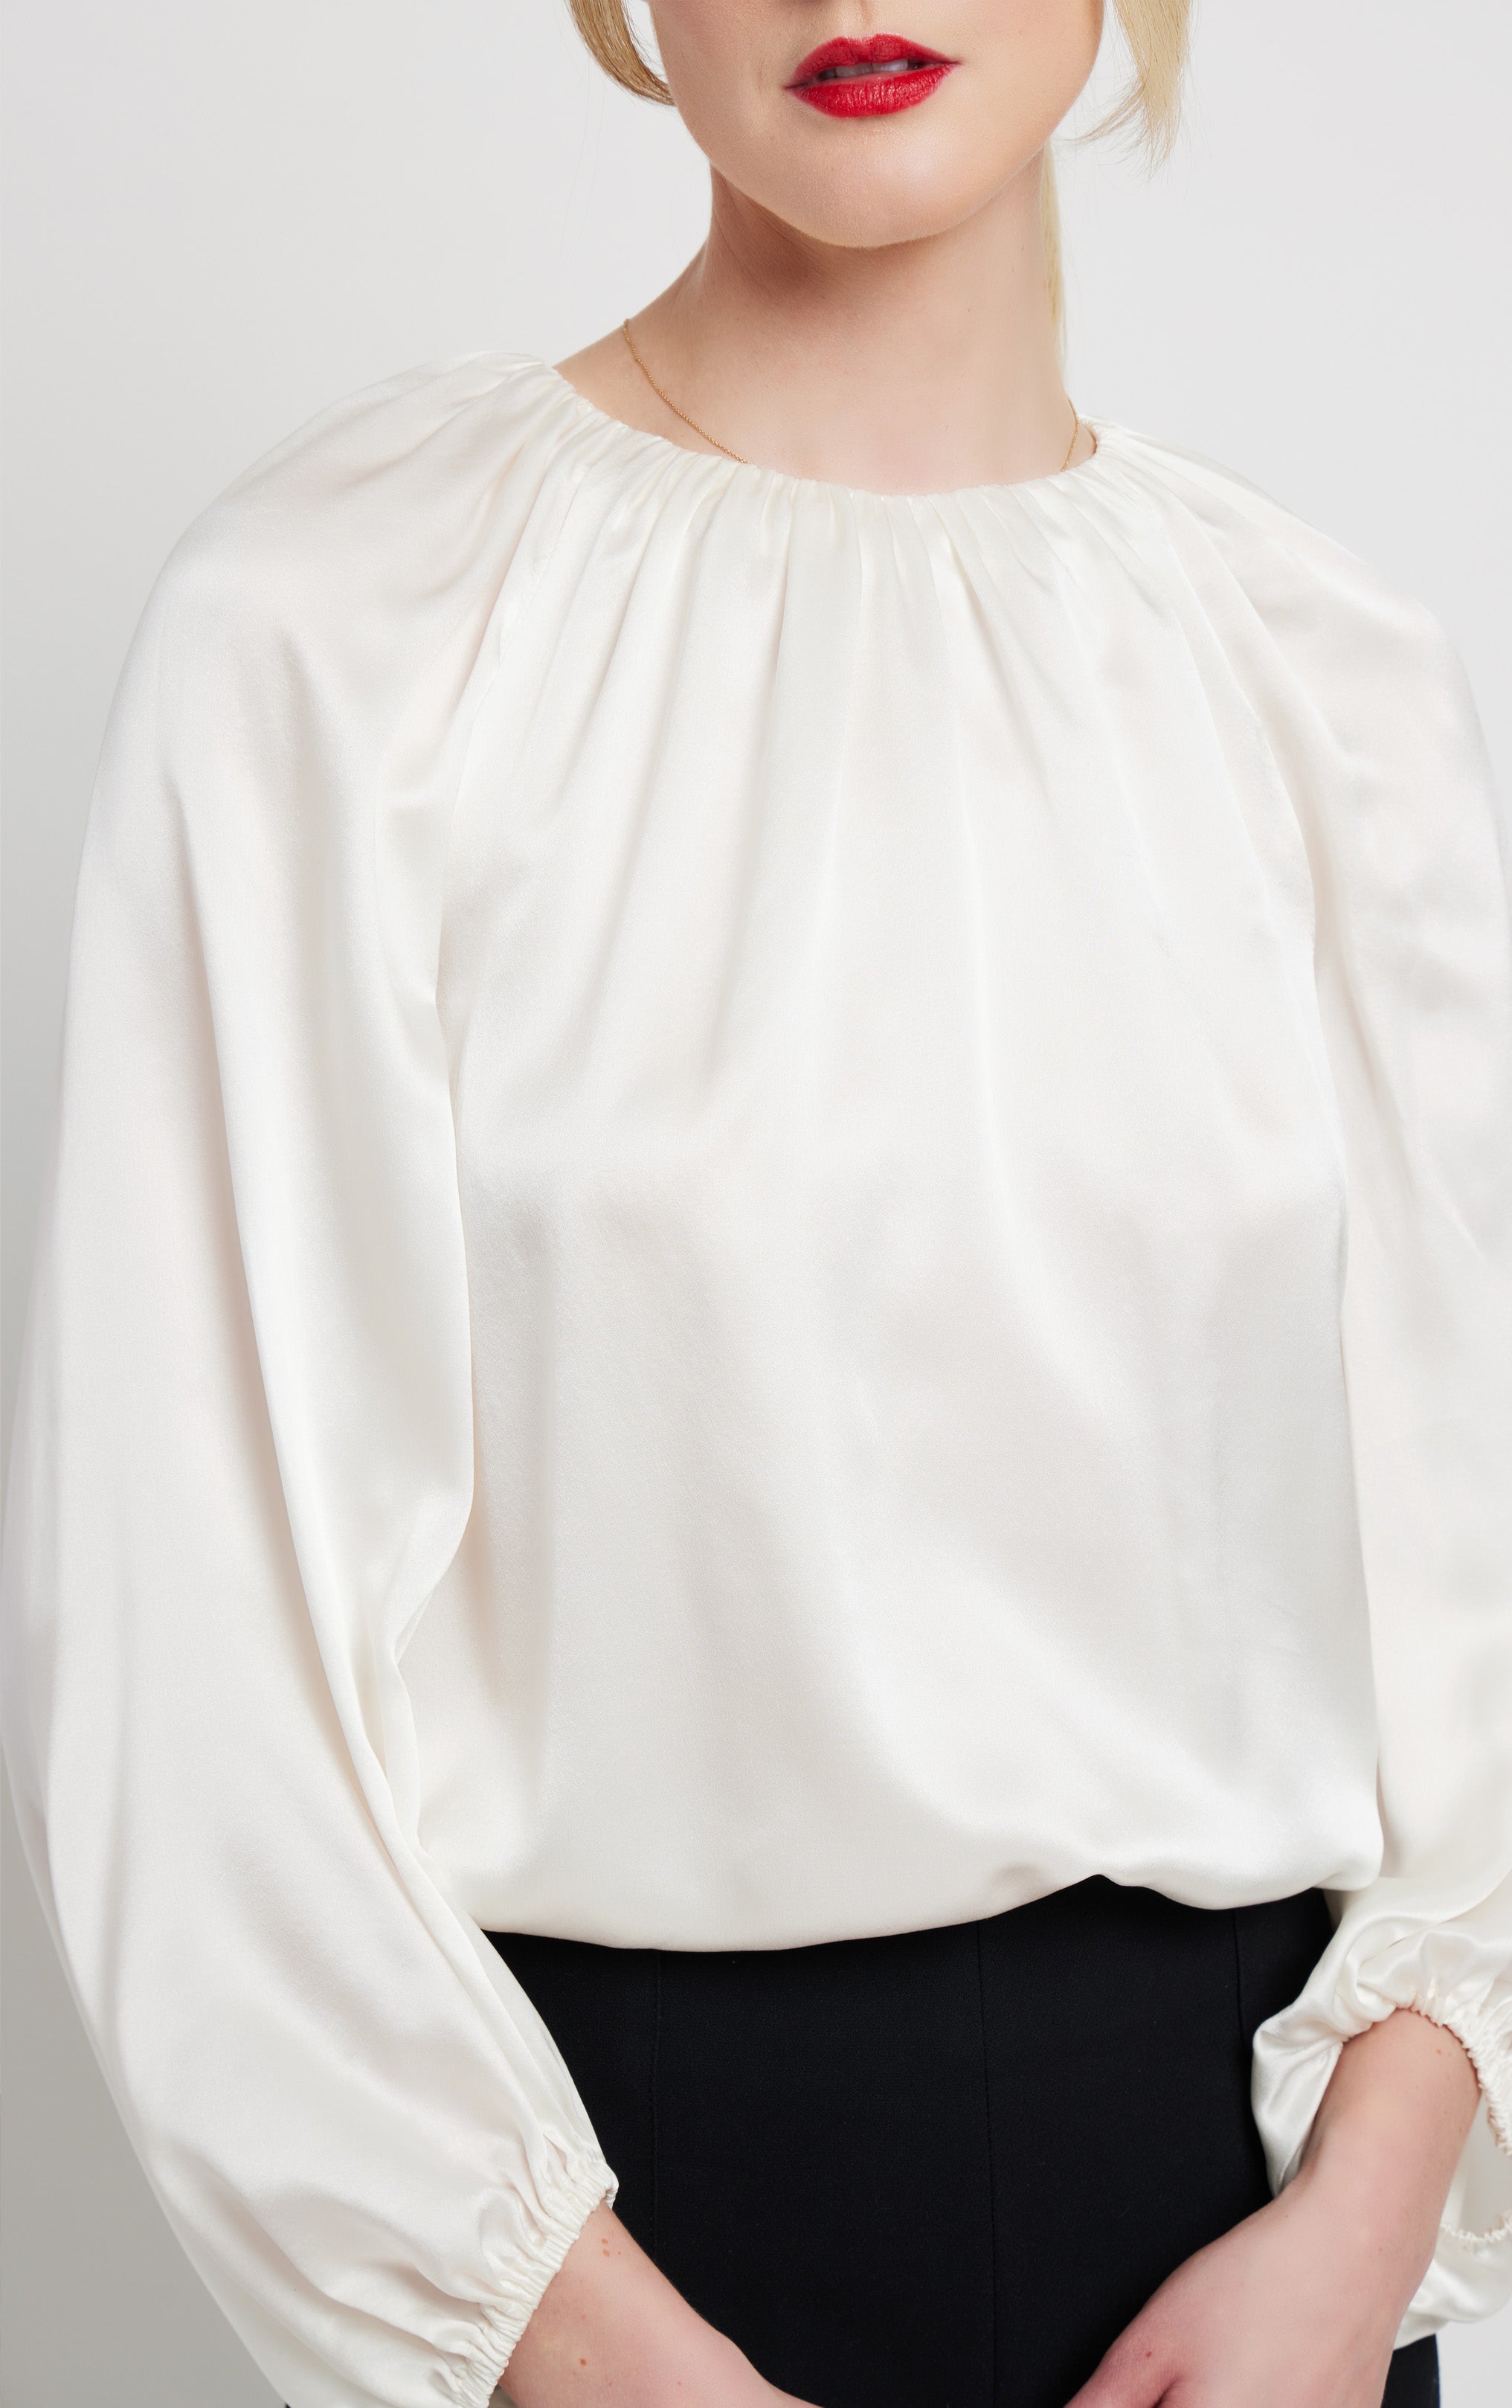 front close up of woman standing wearing silk white top with rusched neck and puff sleeve opening